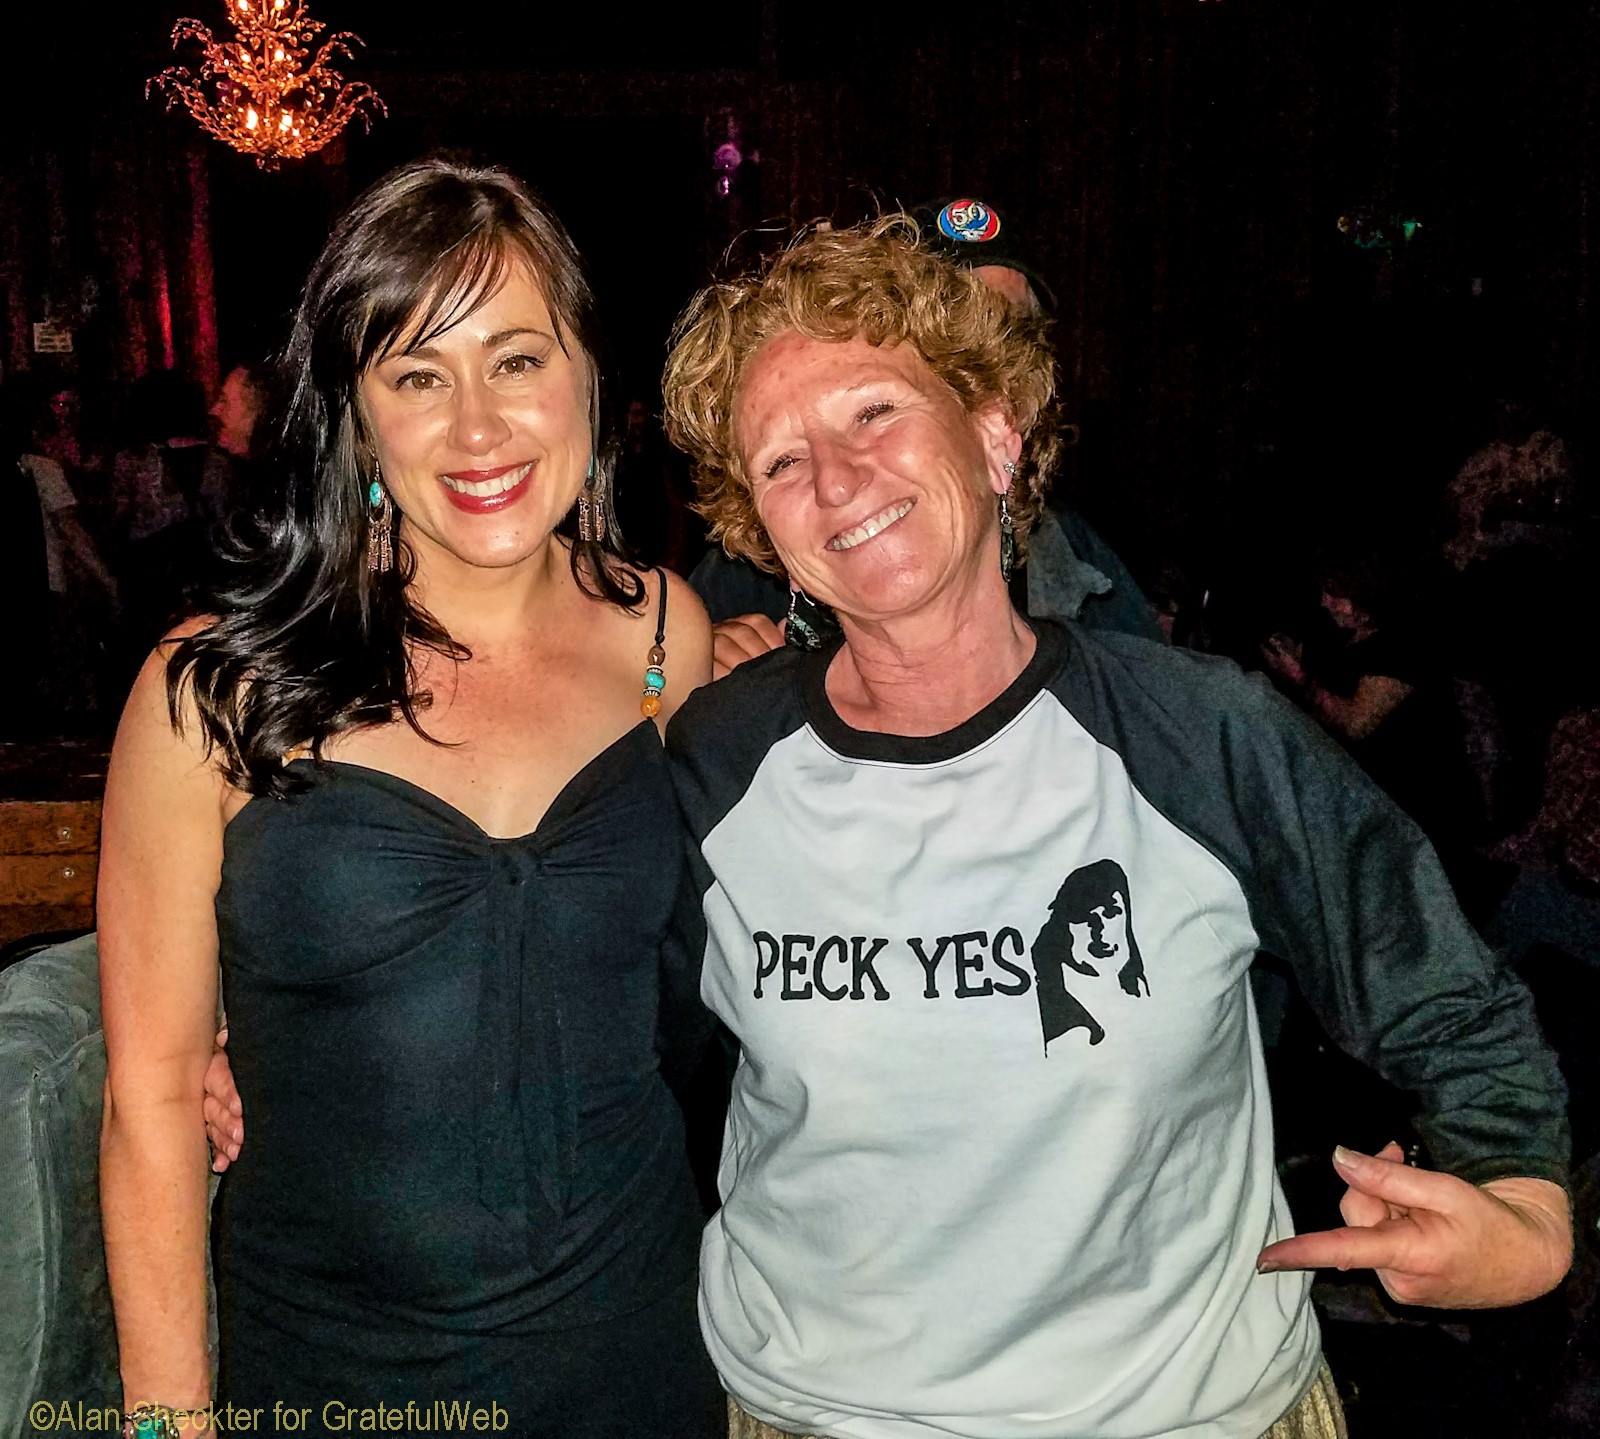 Elliott Peck poses with fan Cheryl, who is showing off a "Peck Yes! T-shirt | Terrapin Crossroads | San Rafael, CA | February 10th, 2018